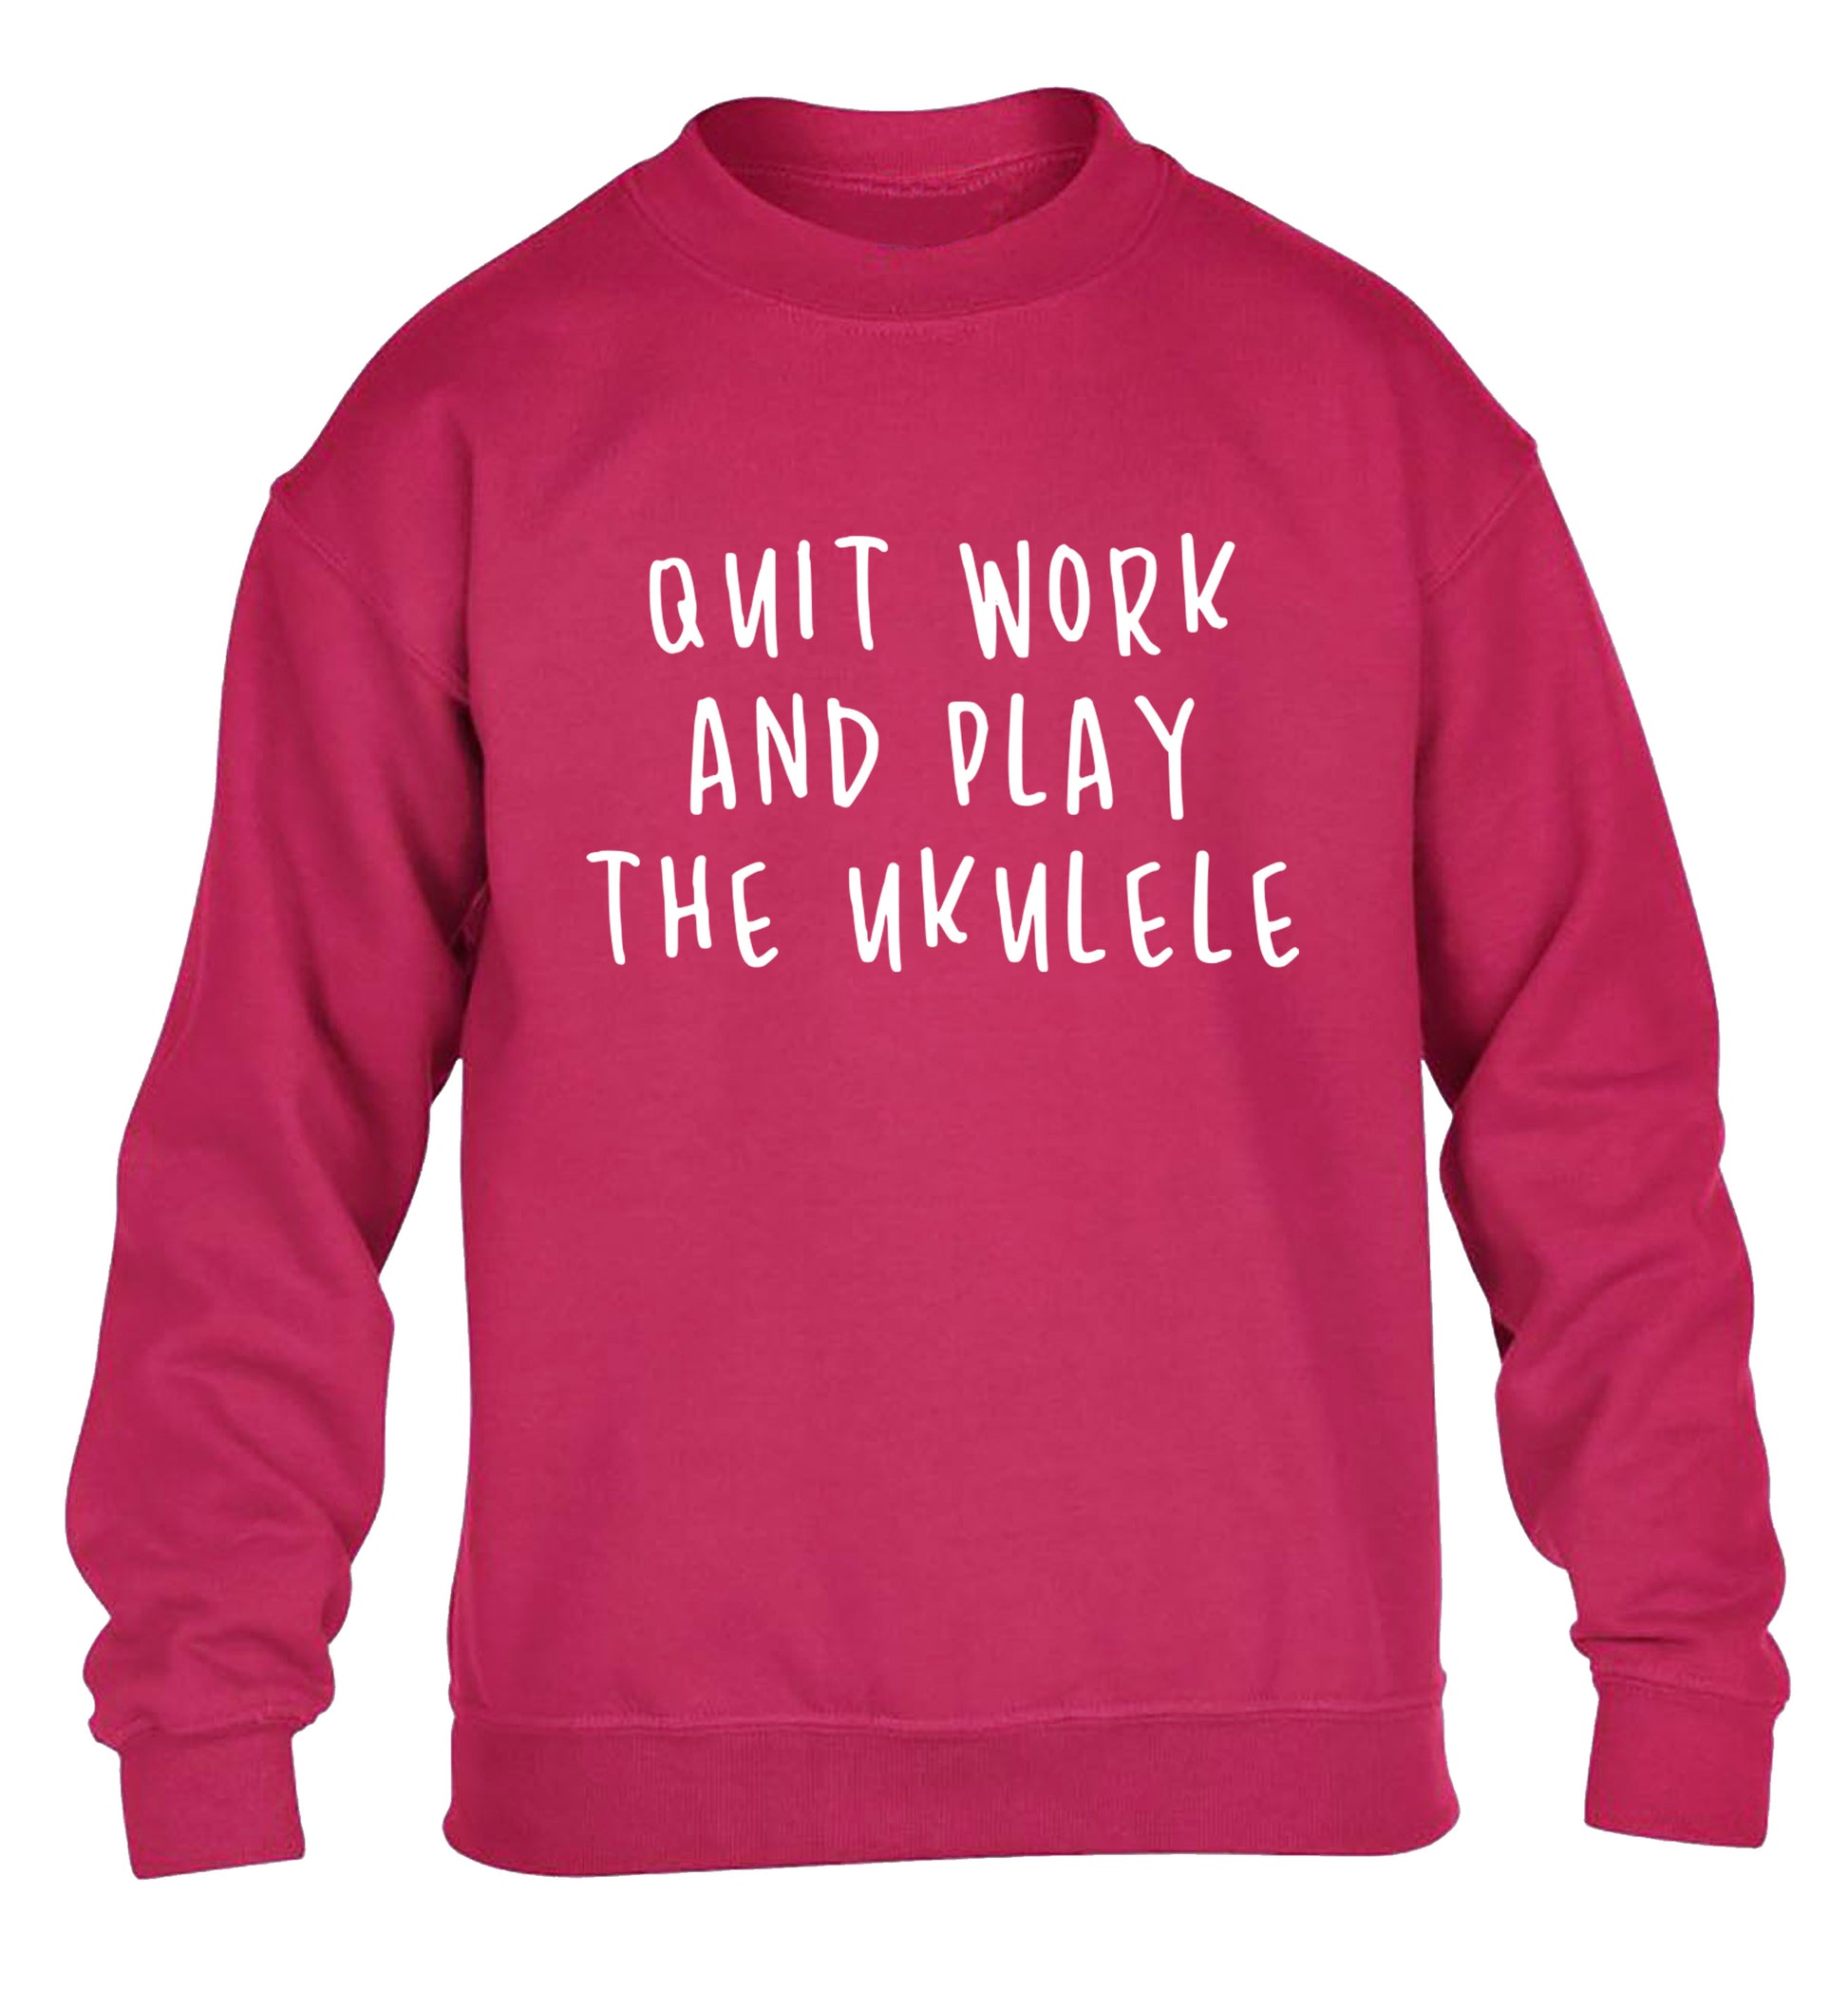 Quit work and play the ukulele children's pink sweater 12-14 Years